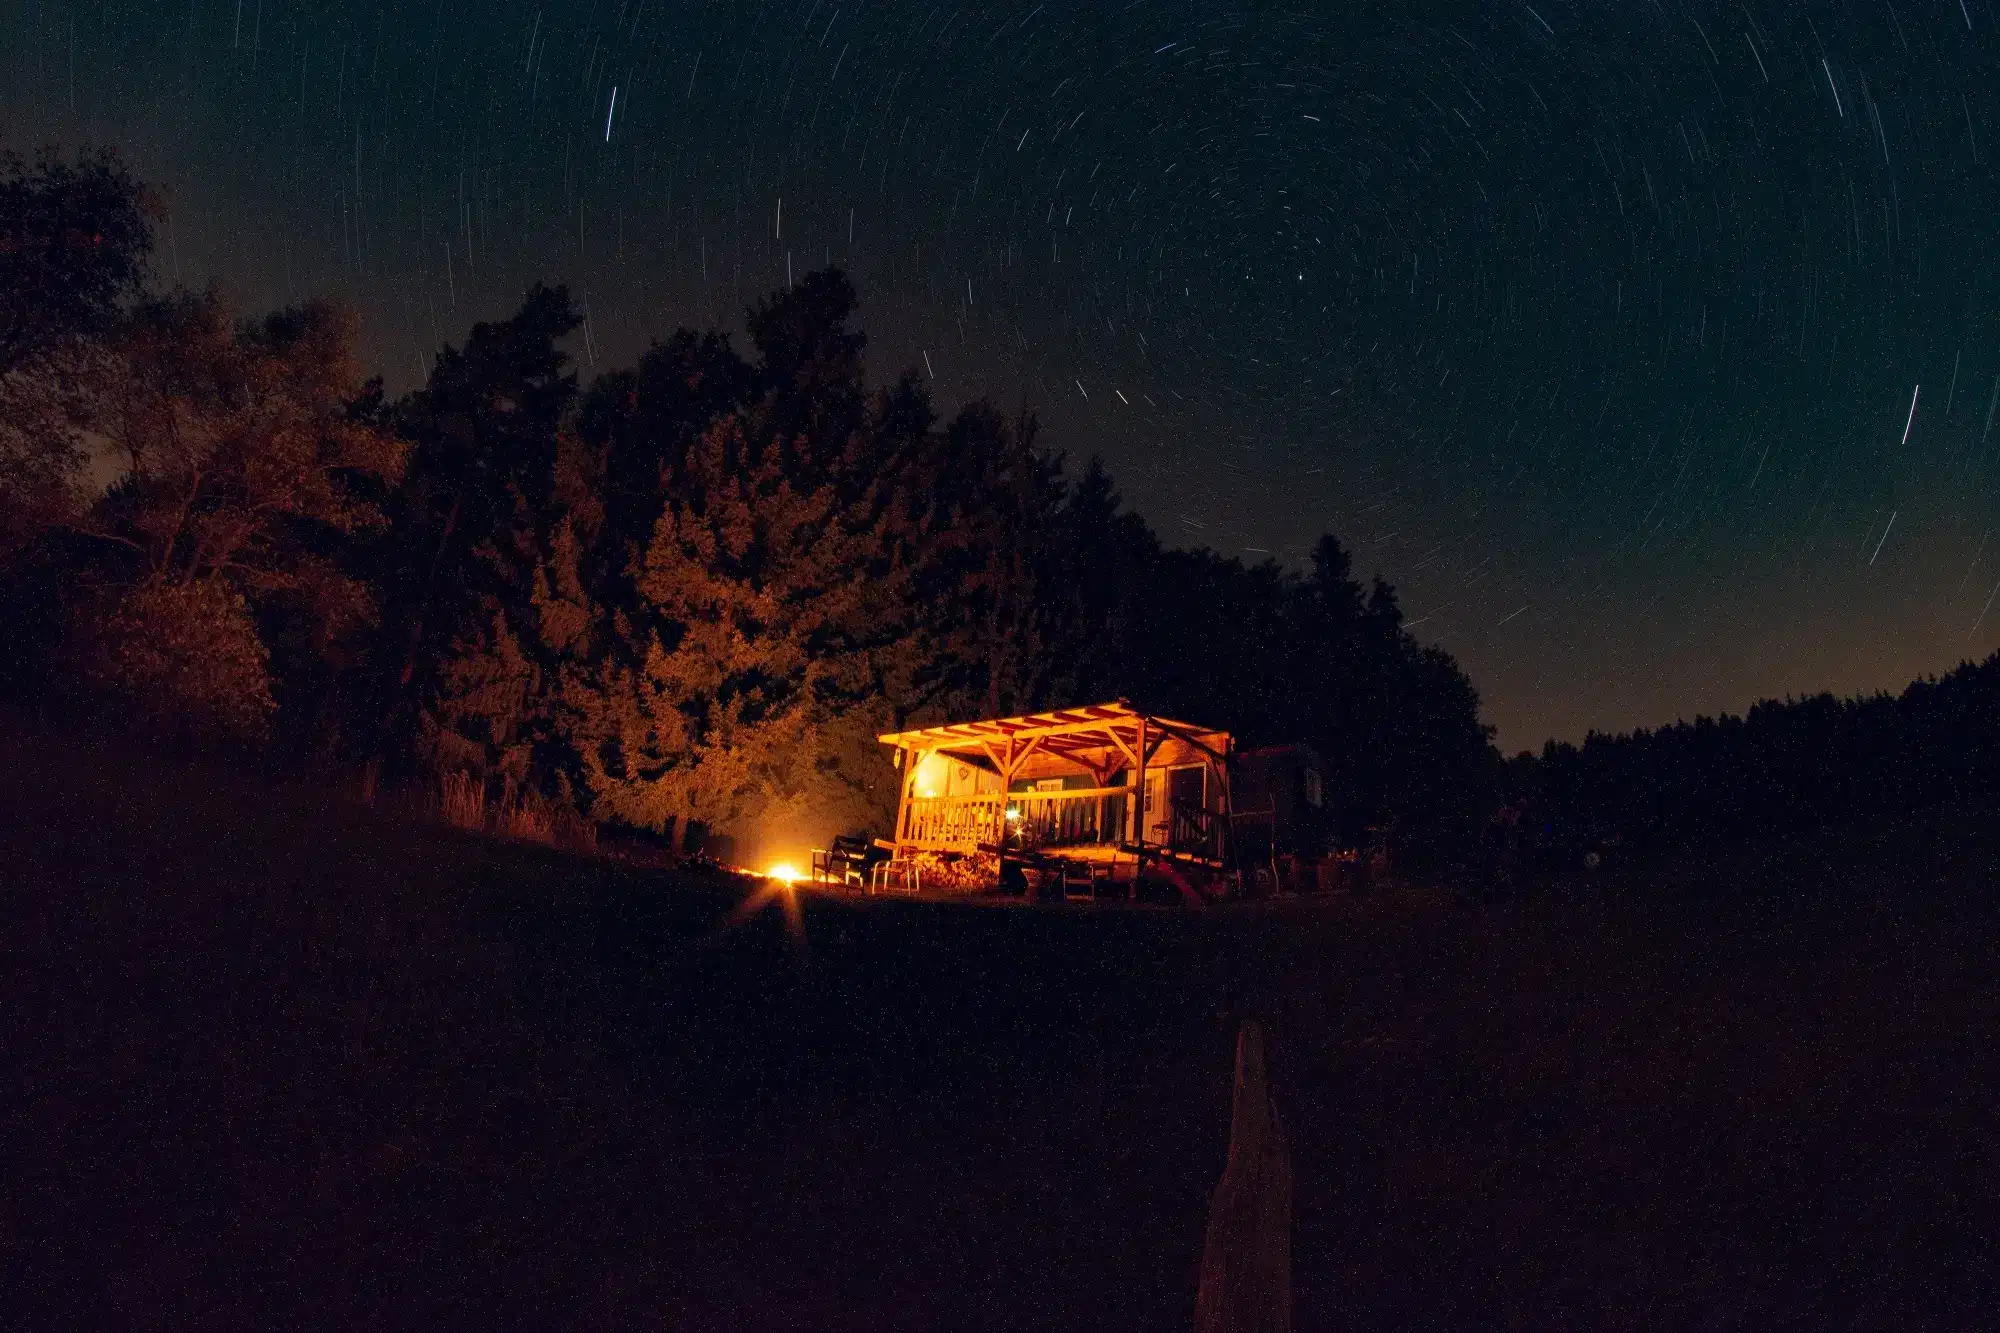 Night sky over the cabin somewhere in the forest.